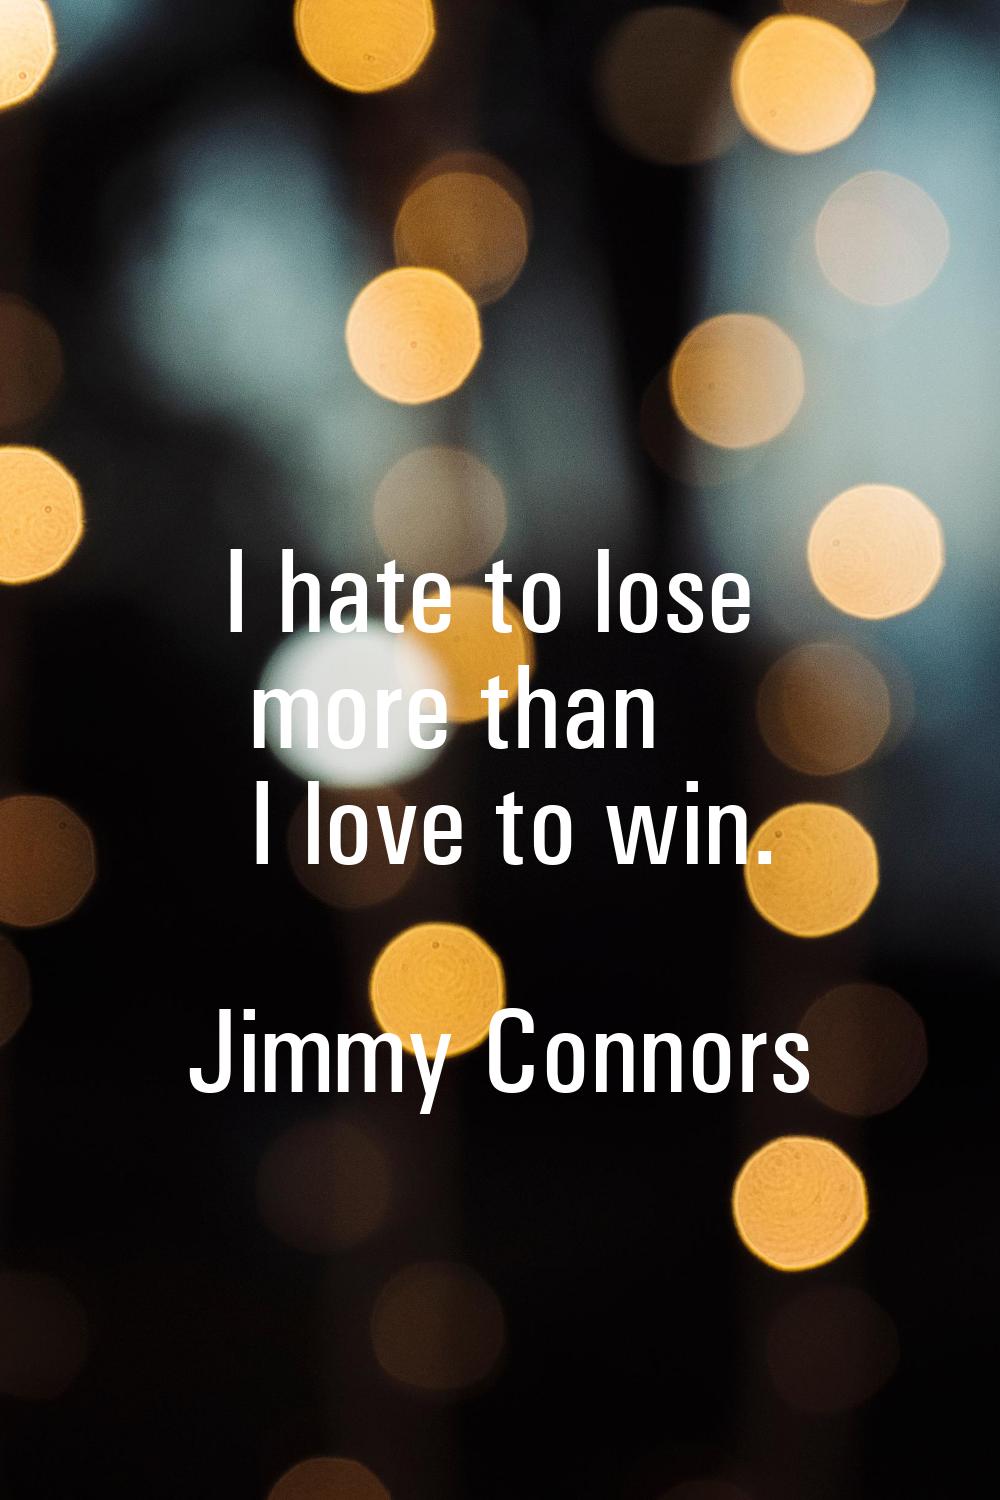 I hate to lose more than I love to win.